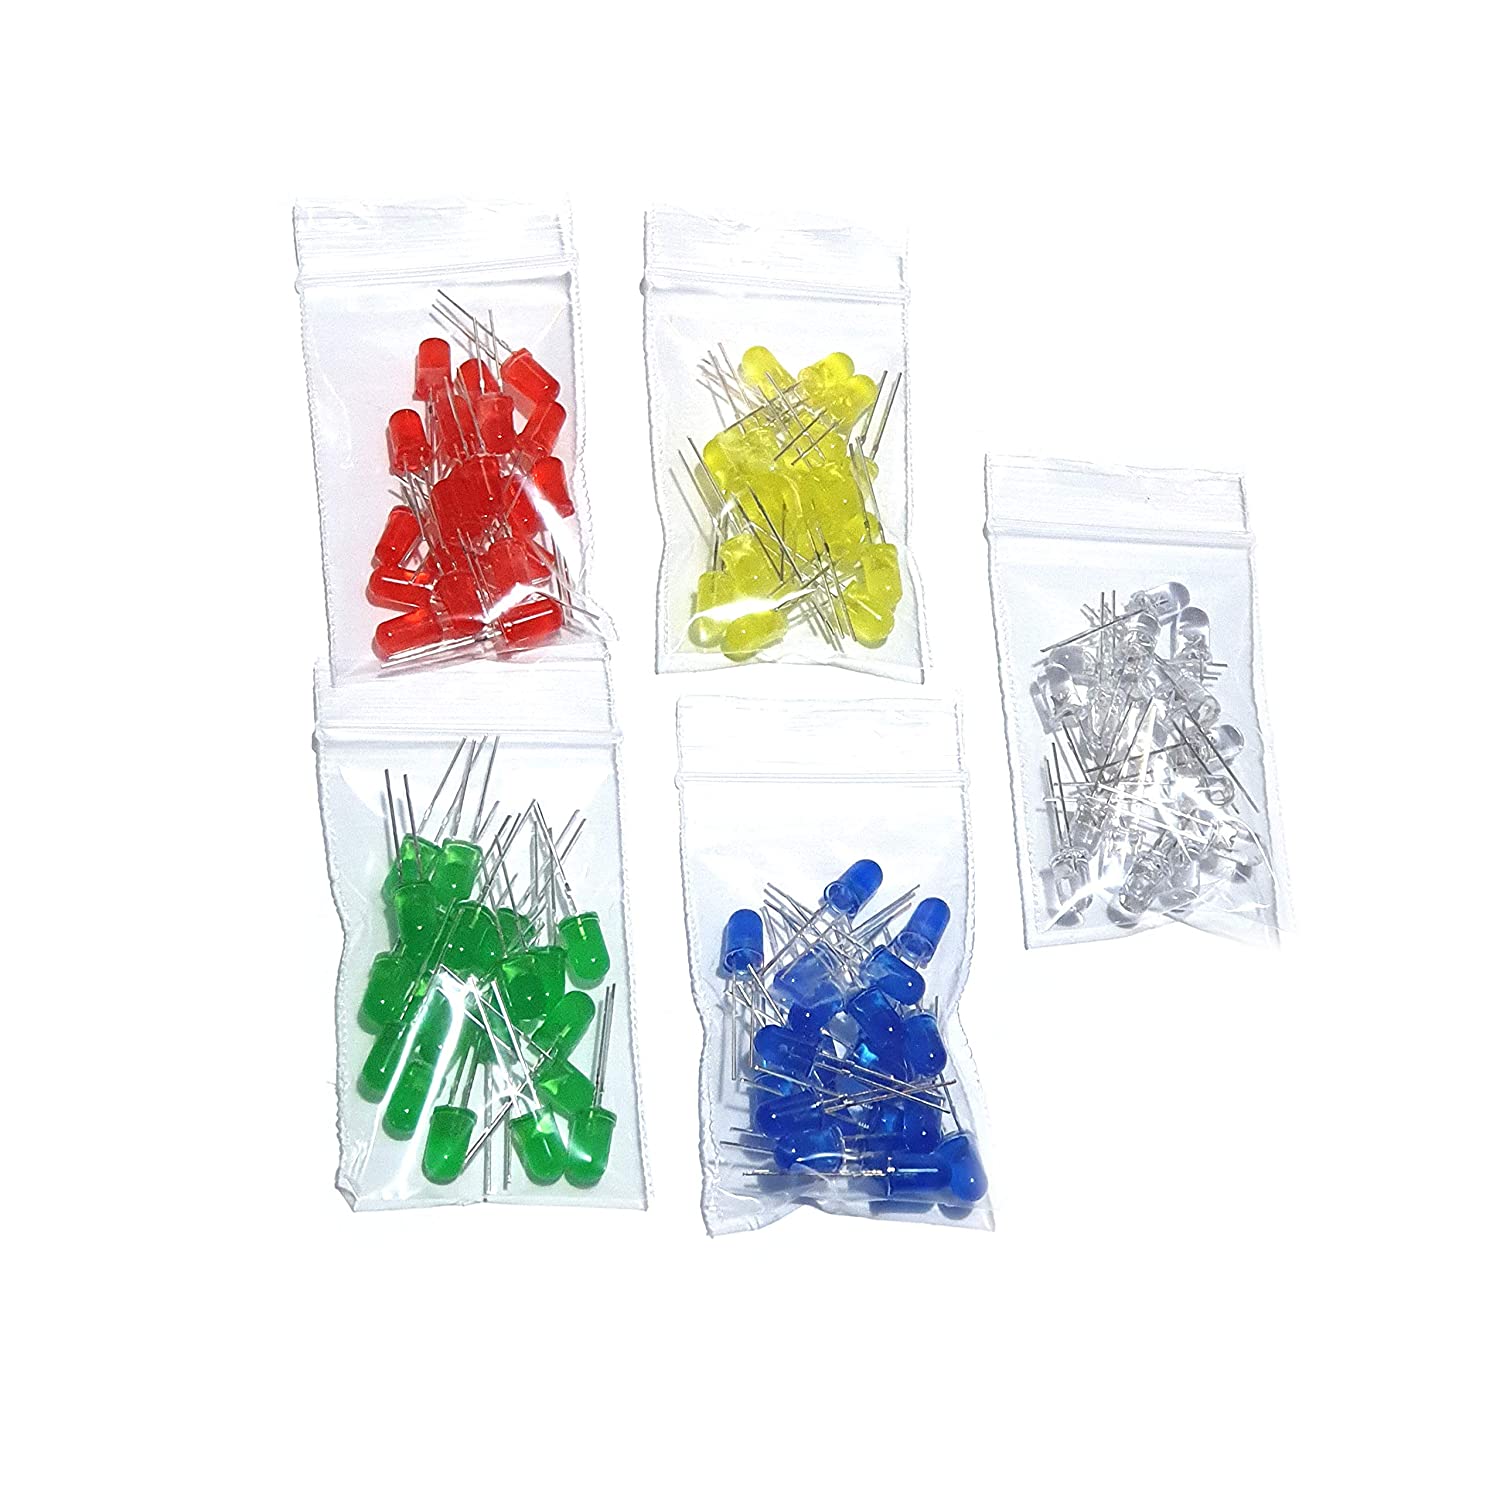 100 Piece 5mm LED Kit Red Yellow, Green Blue White LEDs